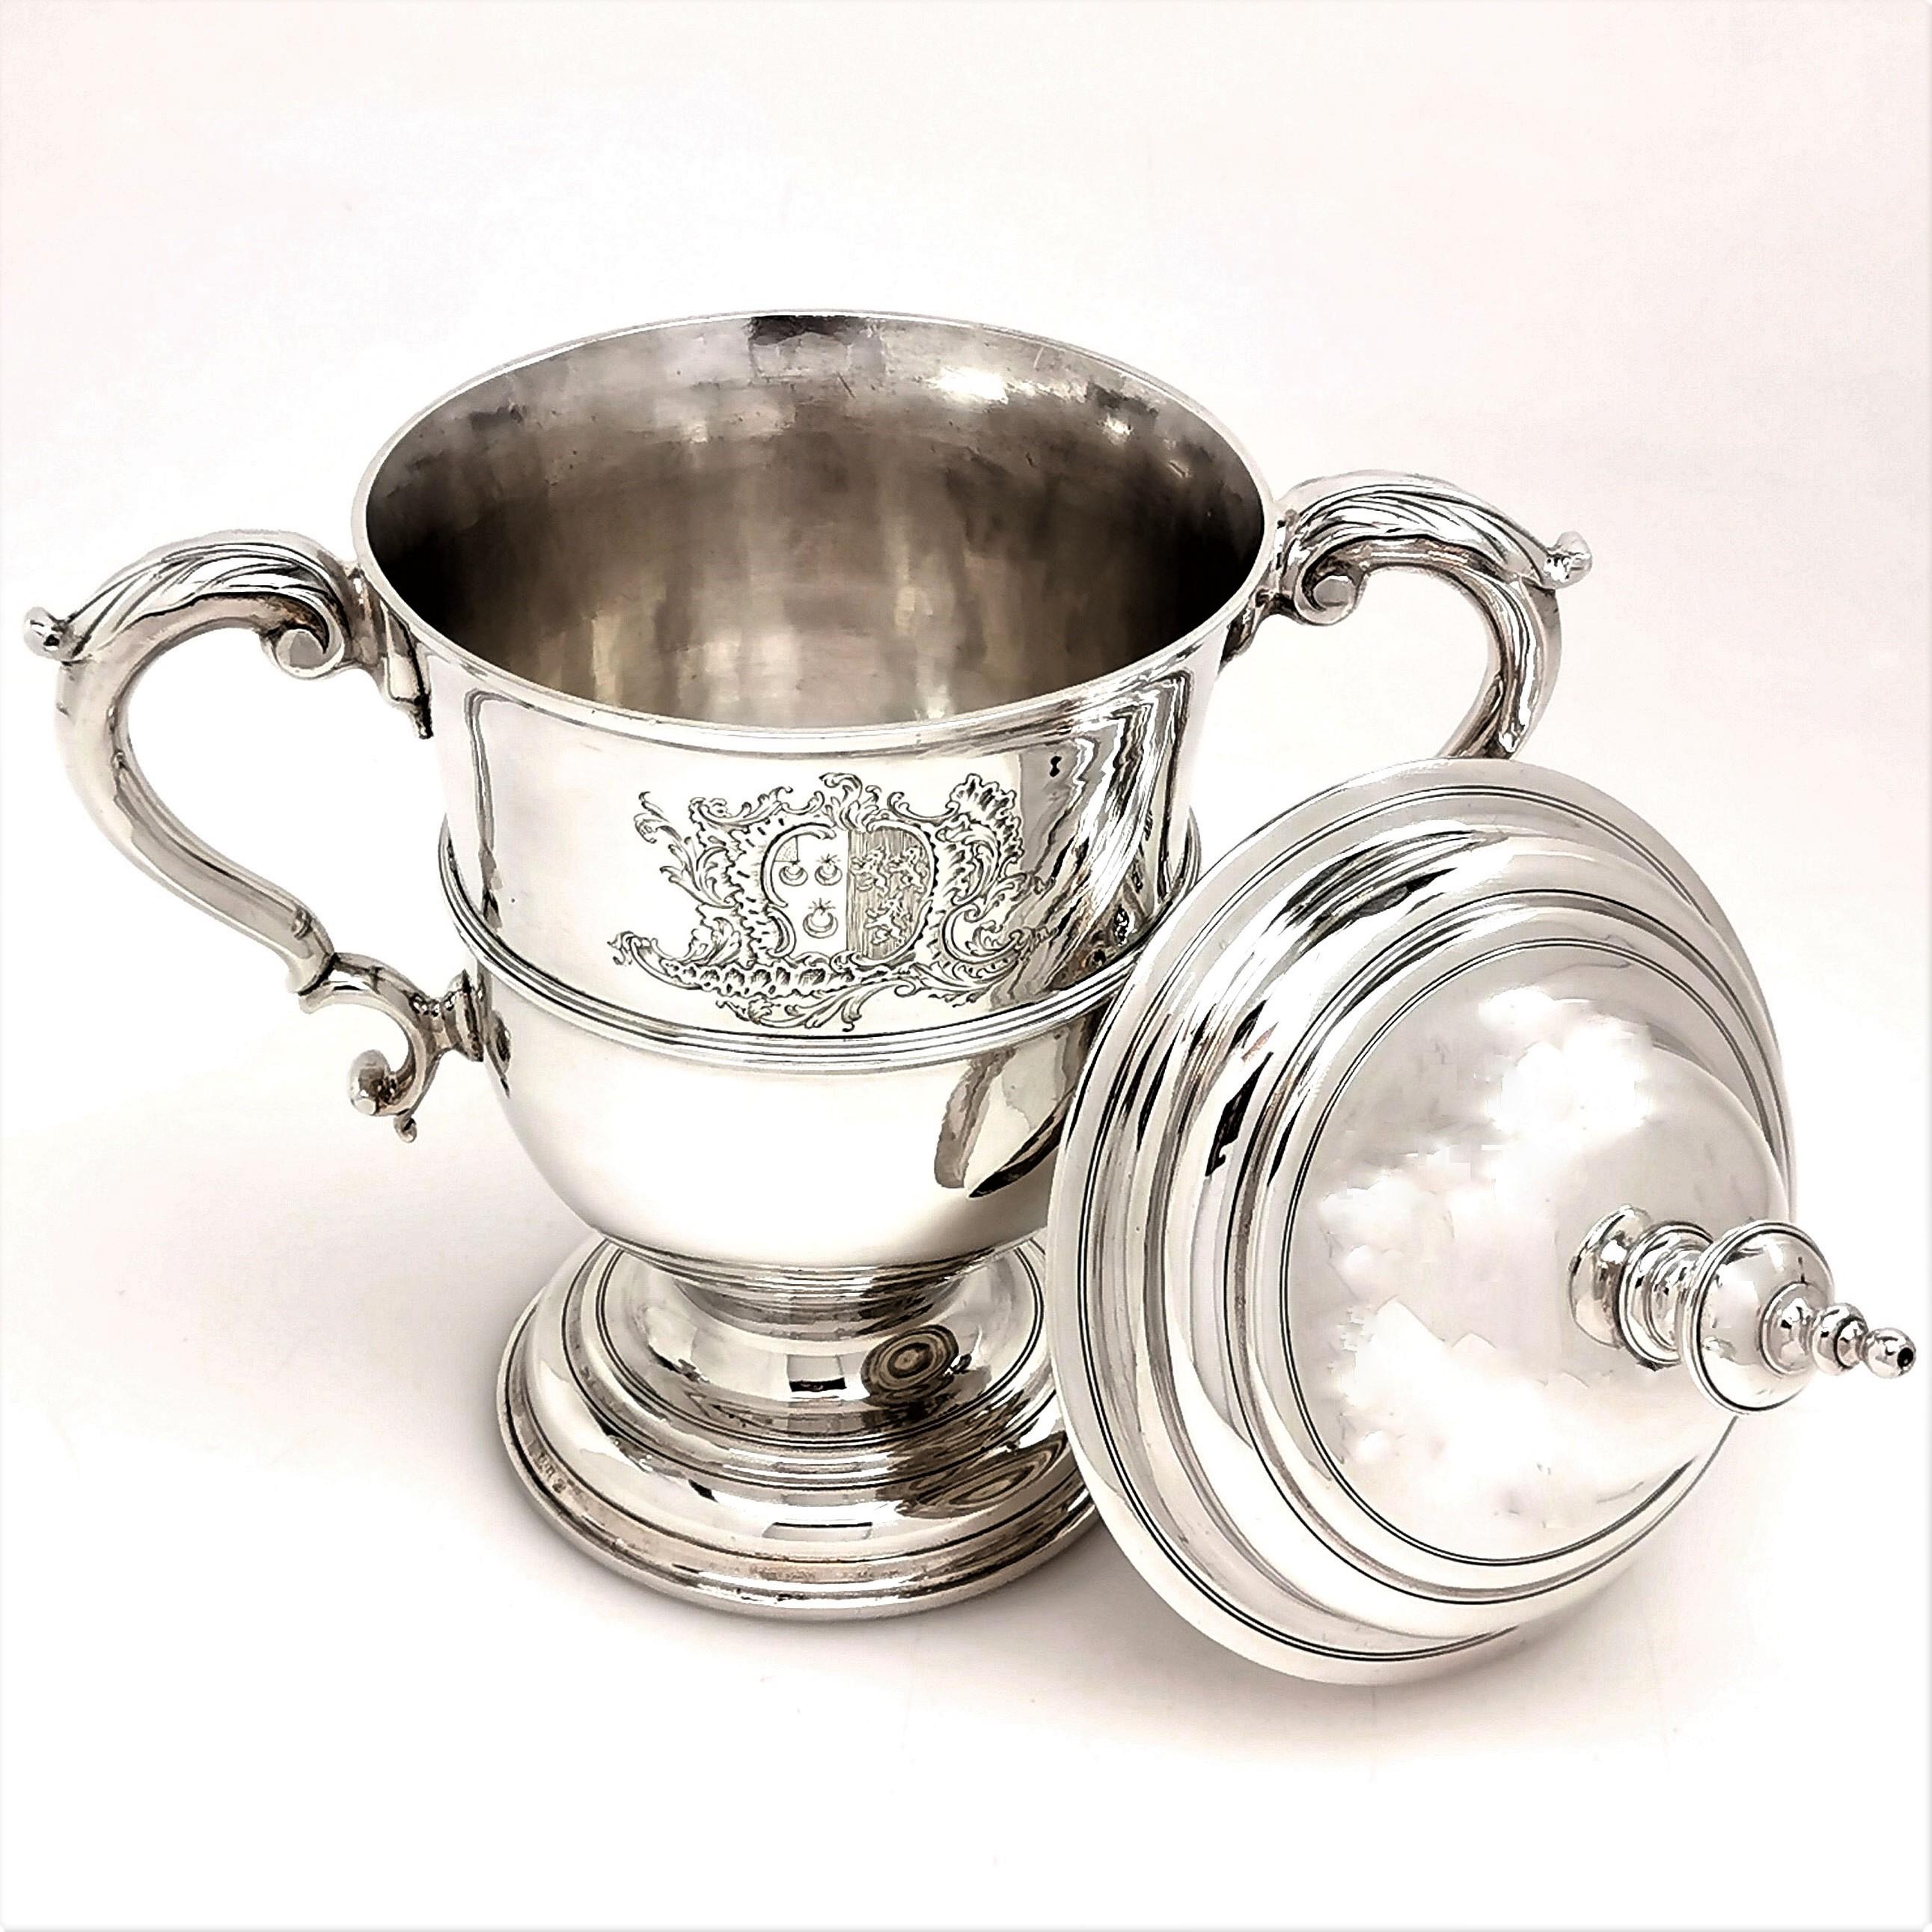 English Antique George II Sterling Silver Two Handled Cup & Cover / Lidded Trophy, 1754